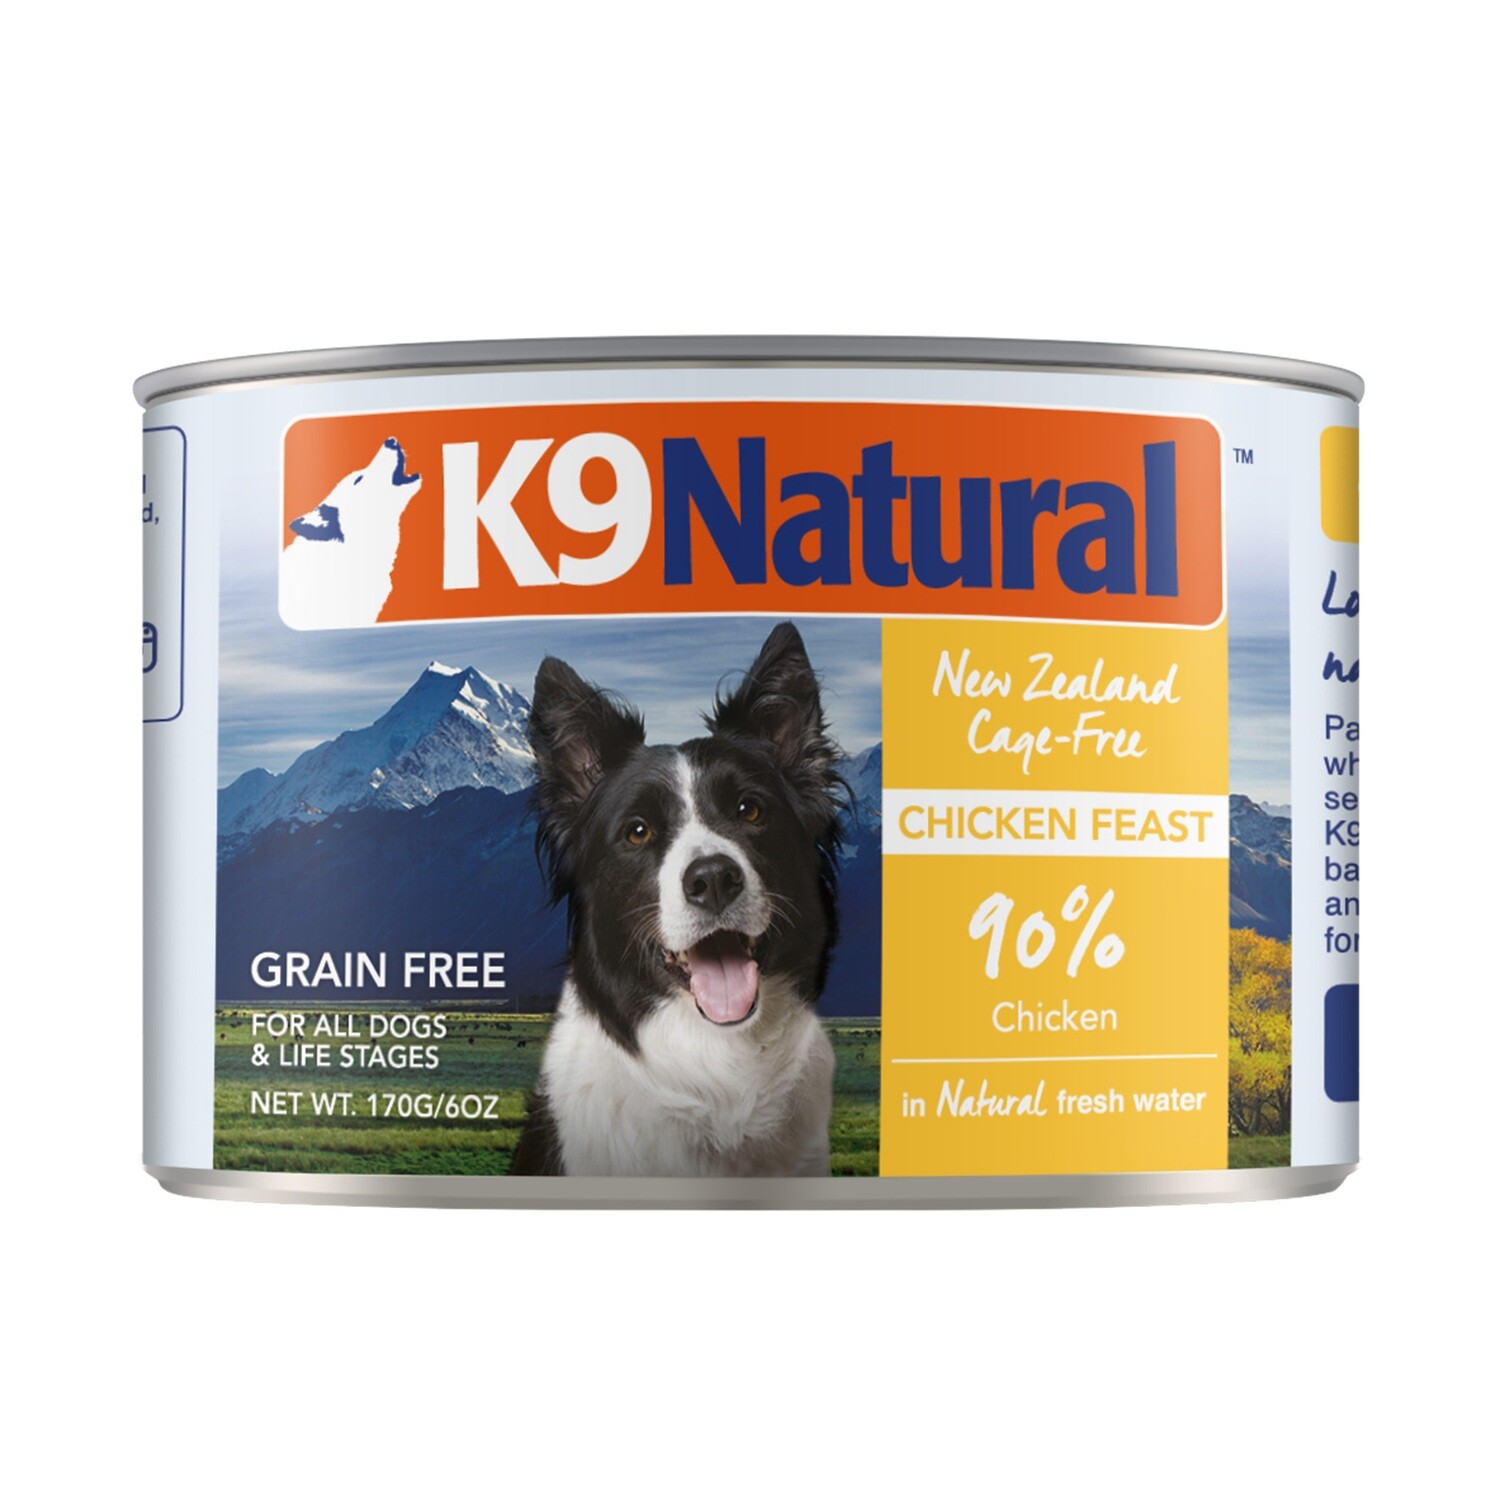 K9 Natural Chicken Feast Dog Canned Food